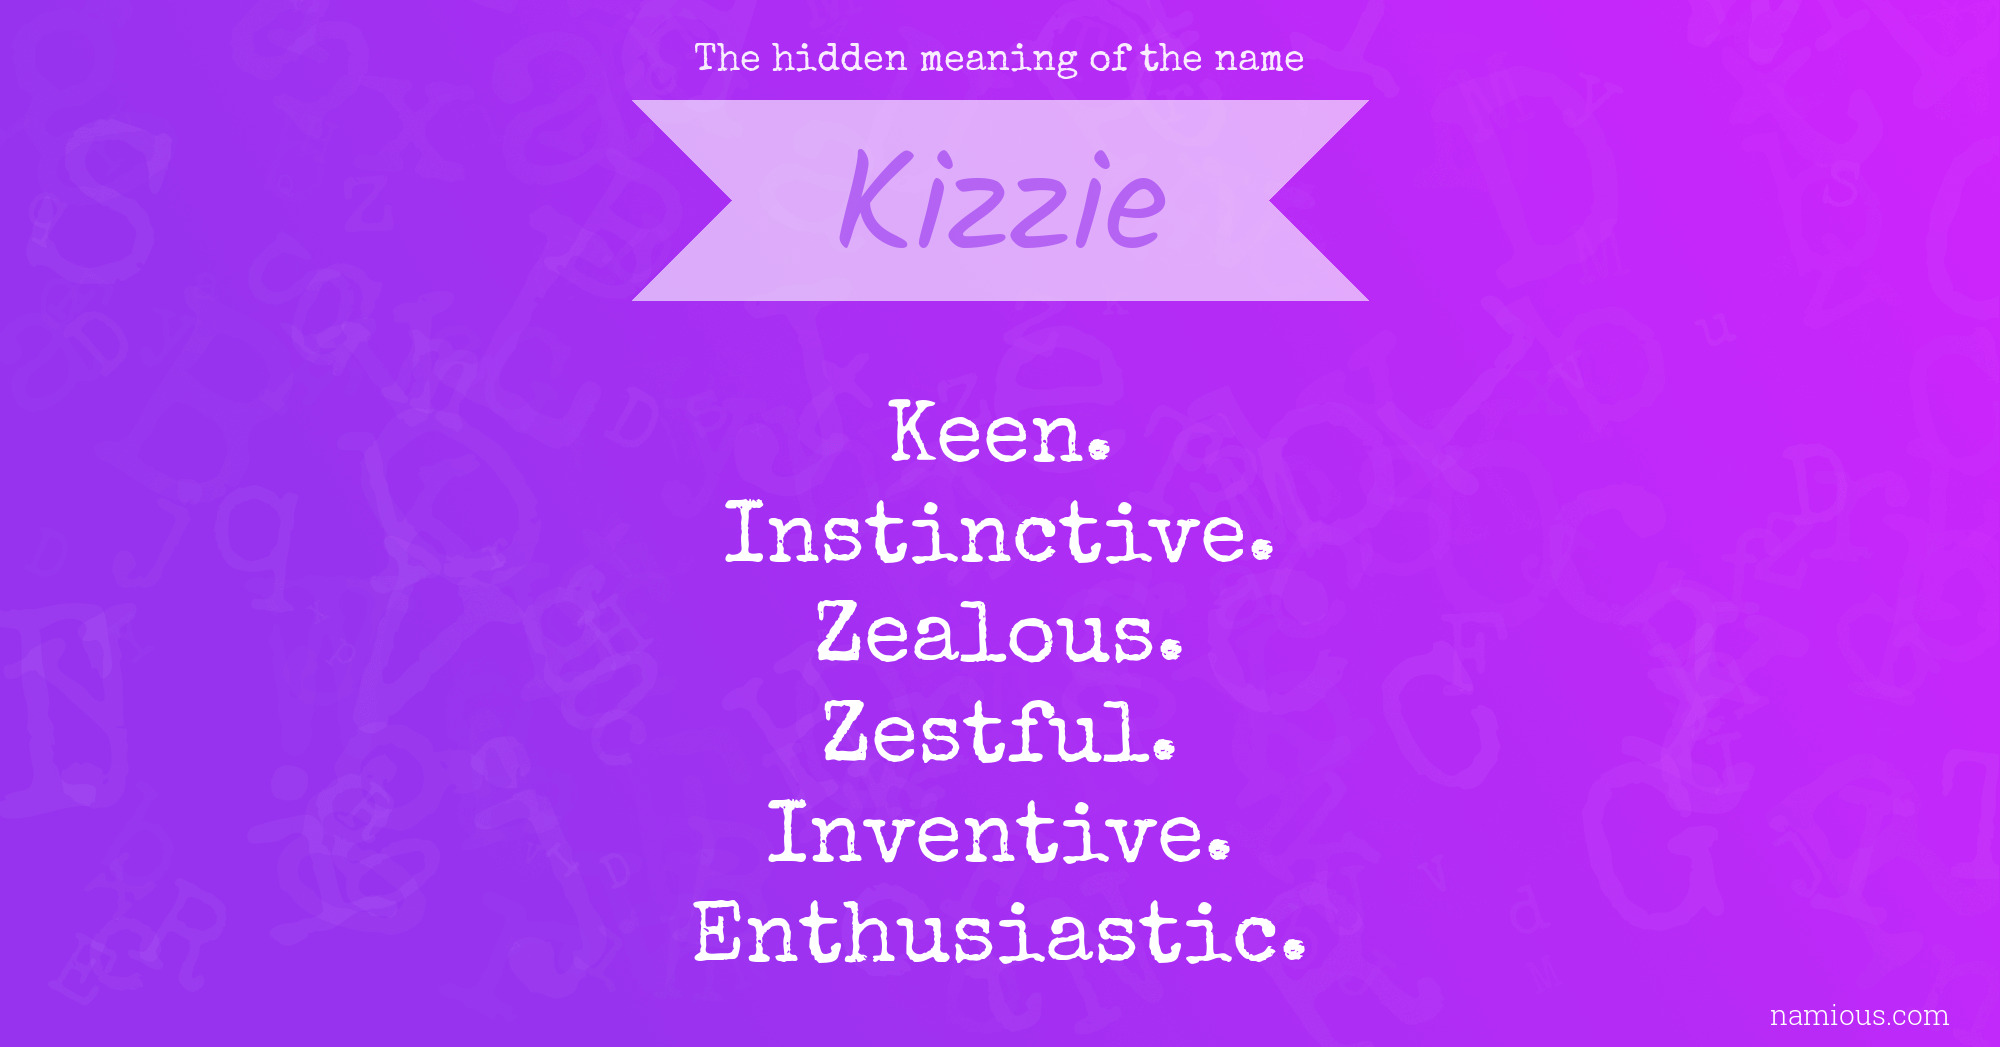 The hidden meaning of the name Kizzie